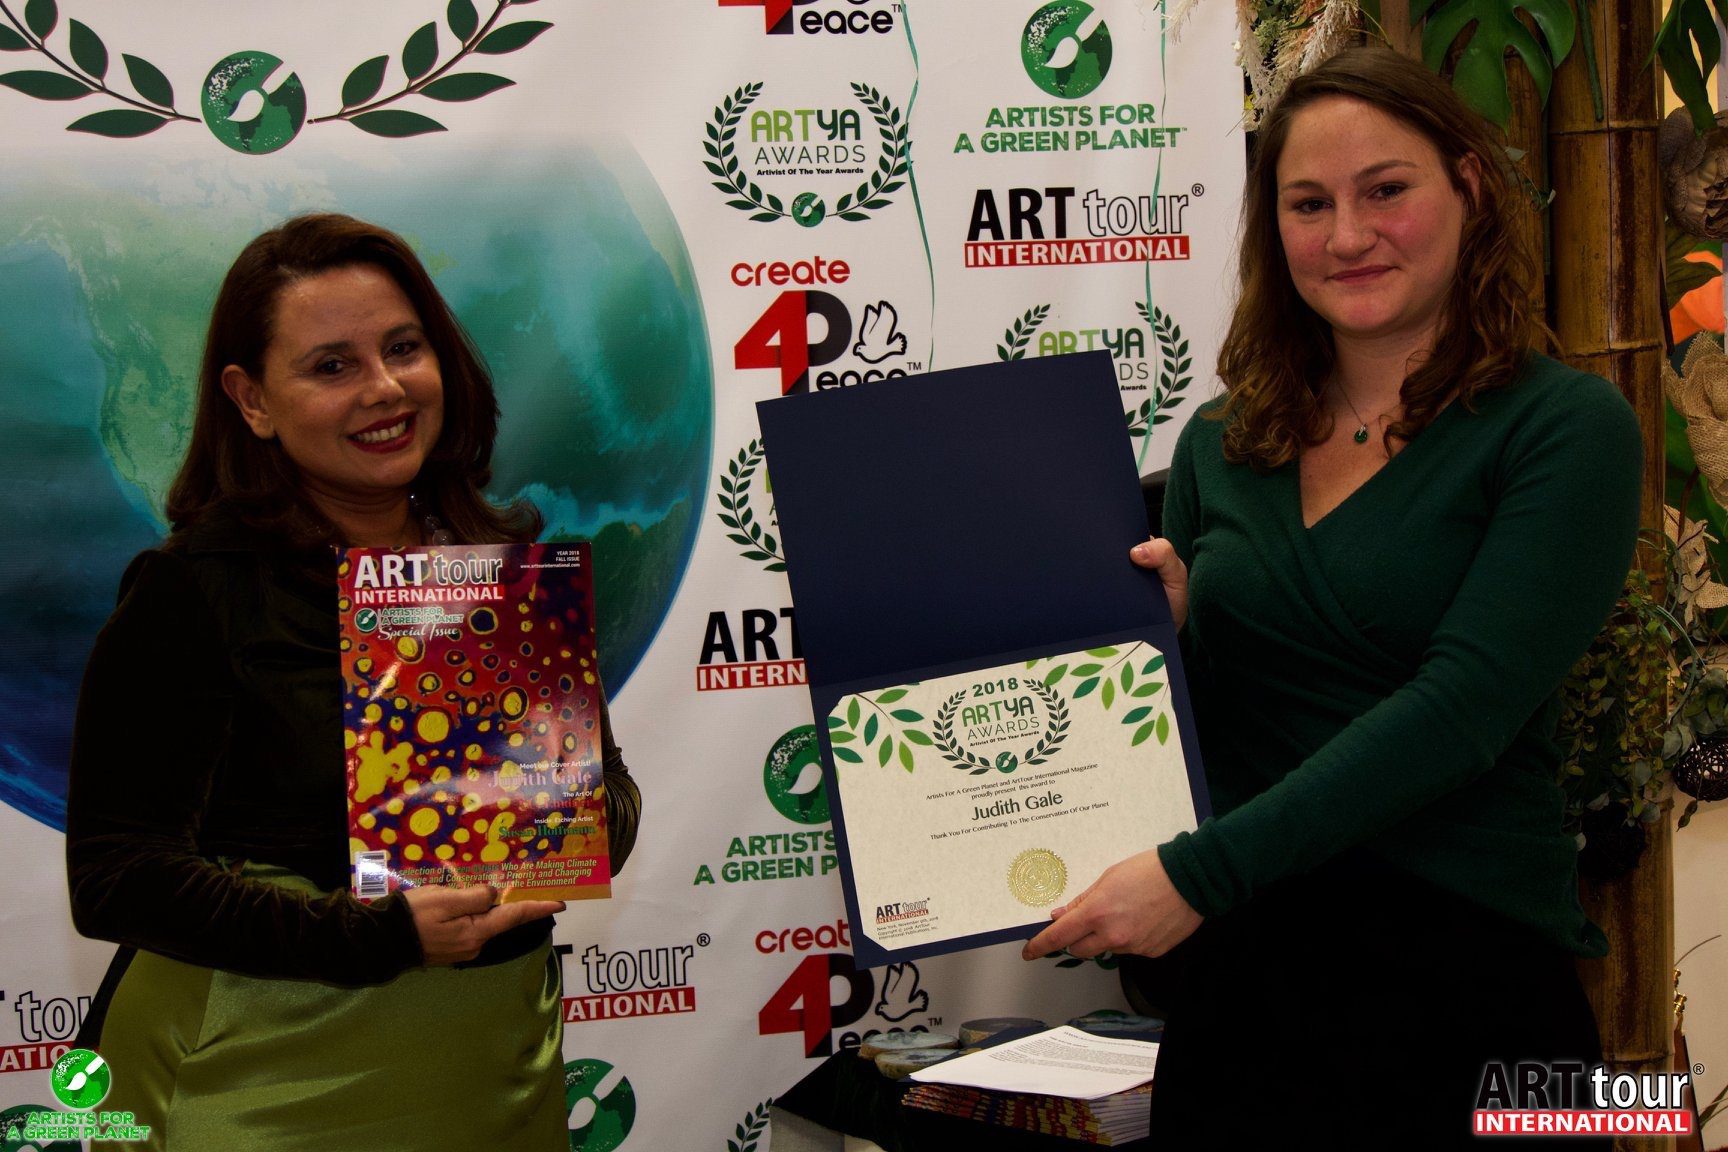 Artya Awards, Artists for a green planet